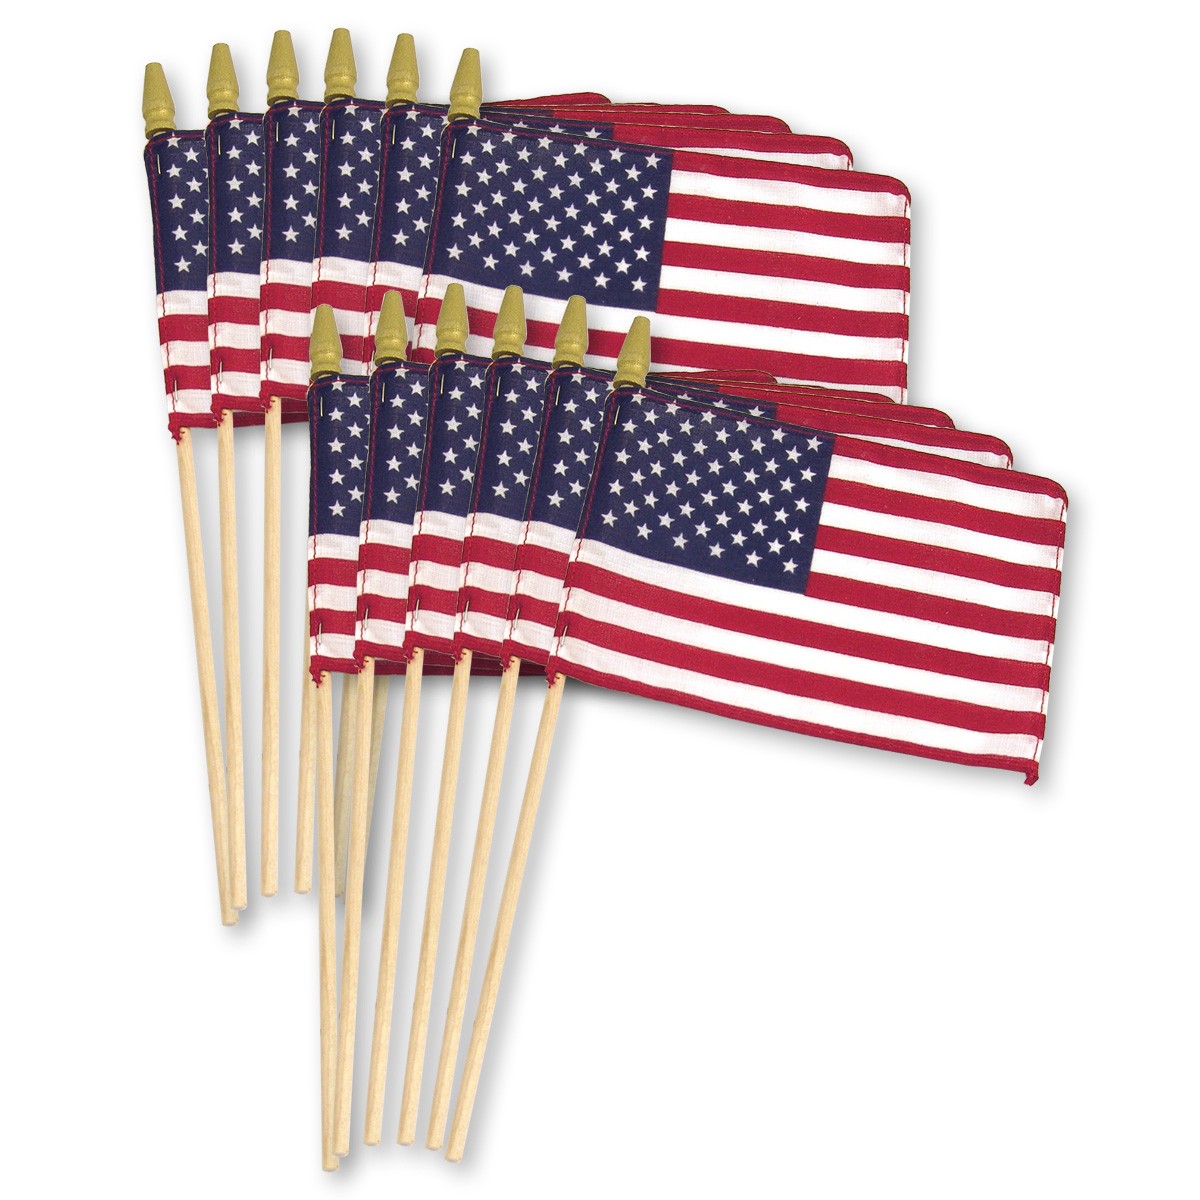 Super Tough US Stick Flag 8in x 12in Standard Wood Stick with Spear Tip - 12PK